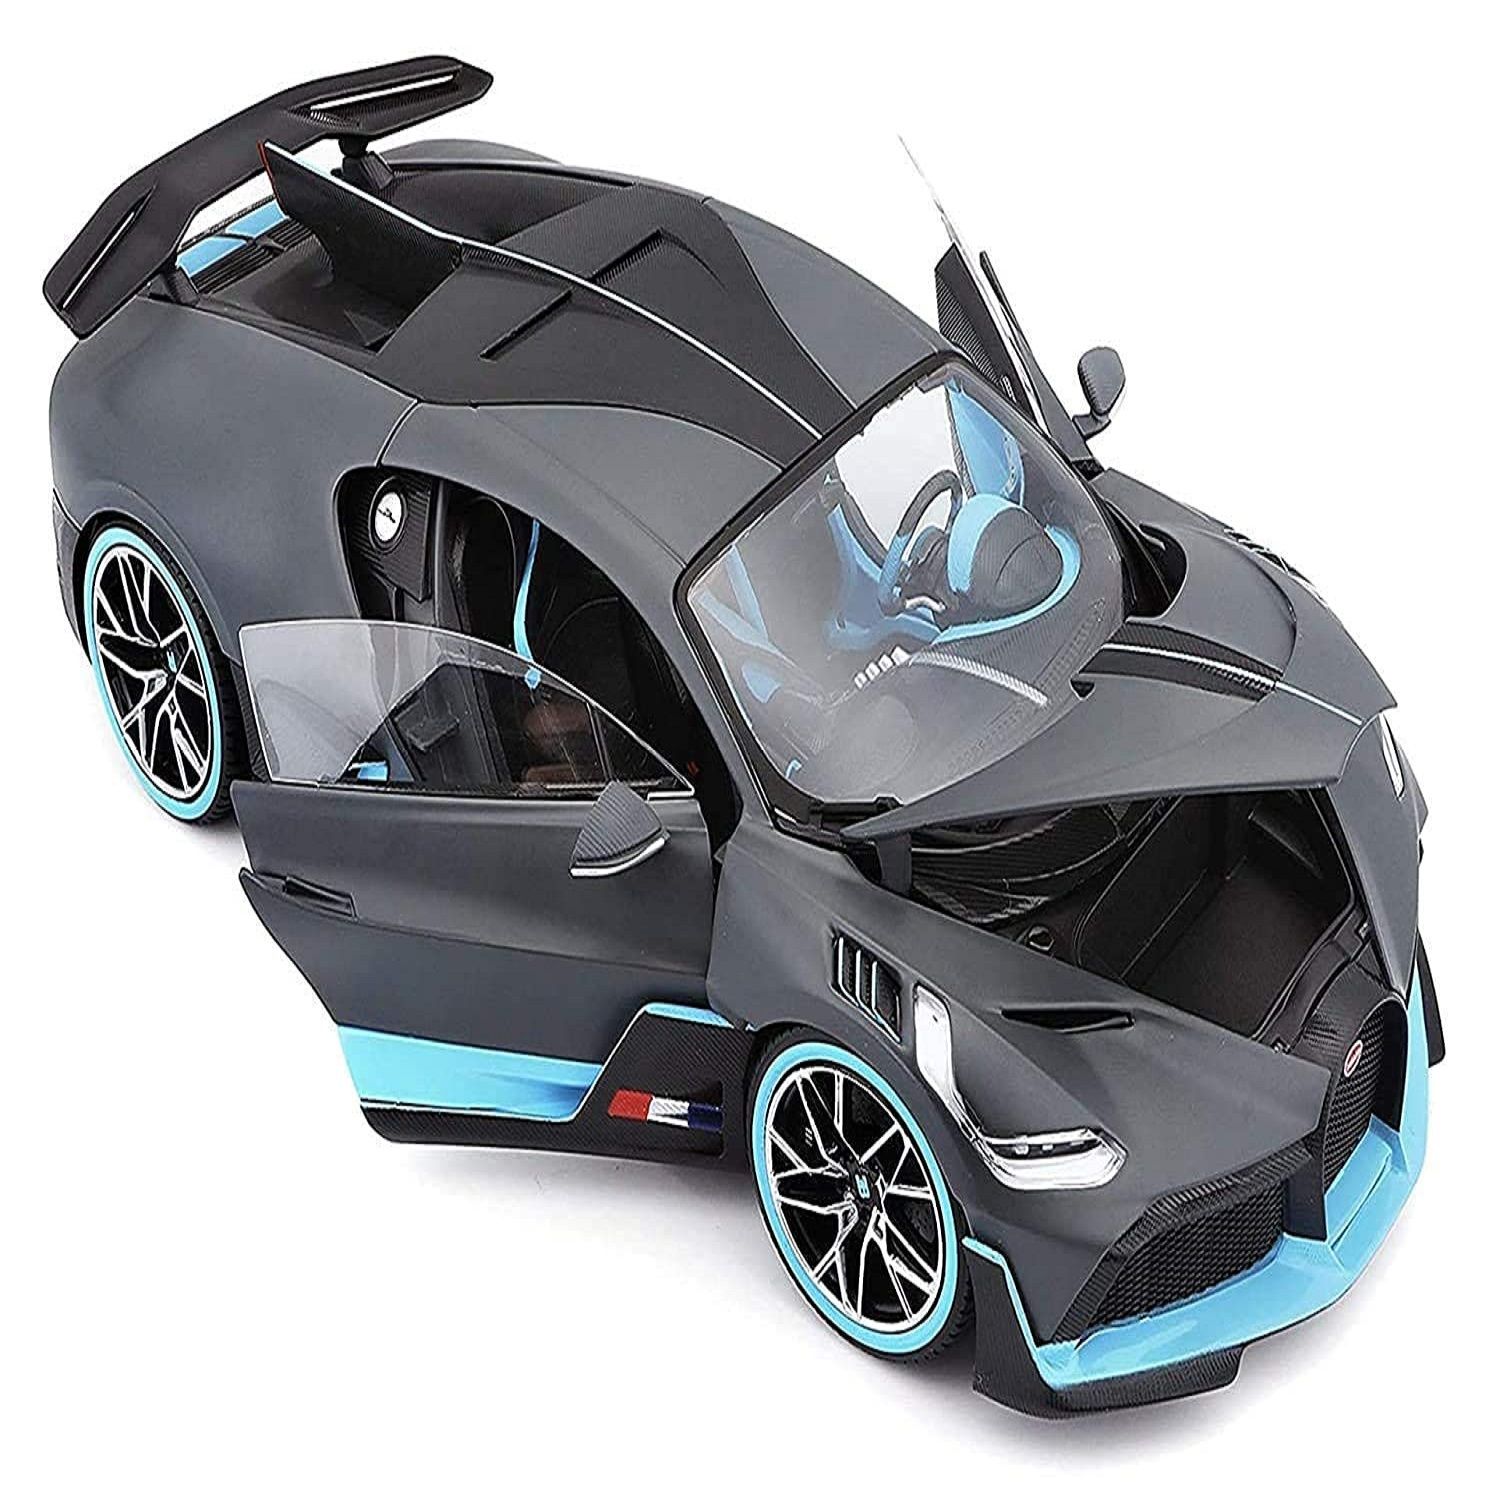 KTRS ENTERPRISE 1:32 Scale Die Cast Metal Model Bugatti Divo Pull Back Car Toy with Light & Sound, Openable Hood, Trunk and Doors Best Gift for Boys and Girls Above 3 Years